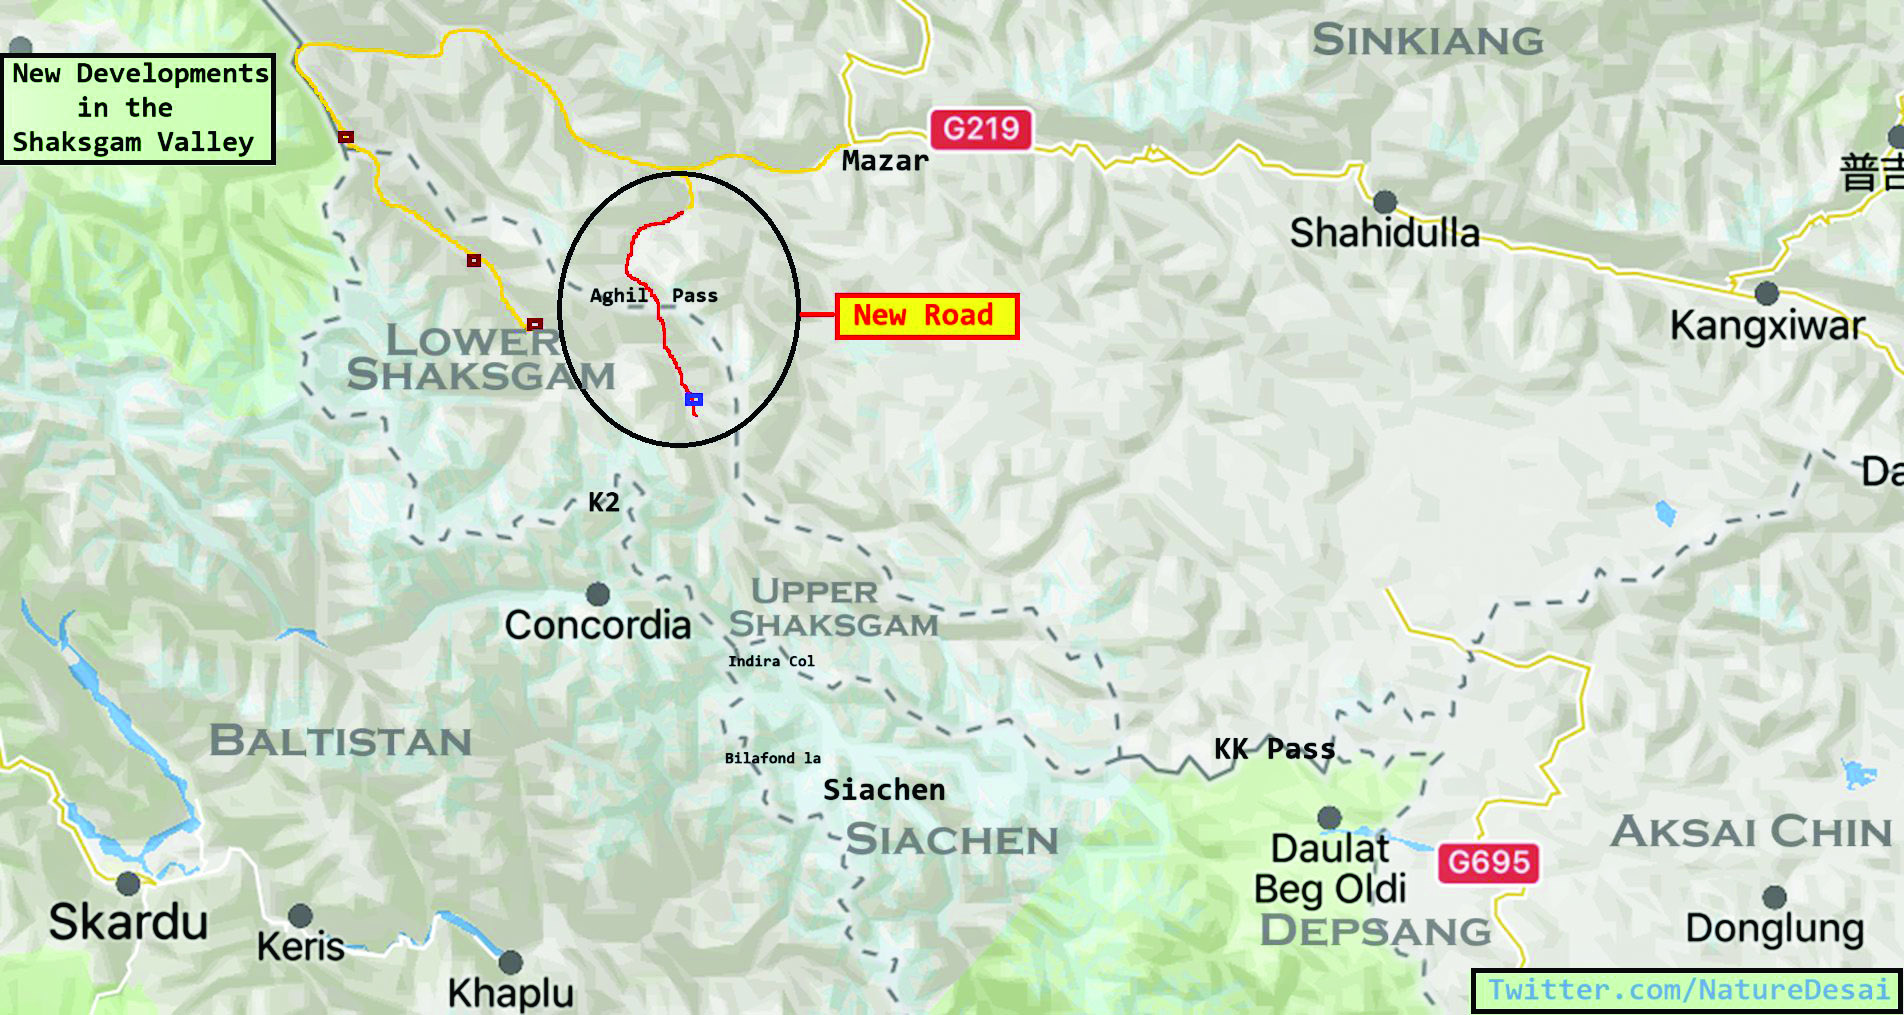 China building road in PoK near Siachen glacier, satellite images show